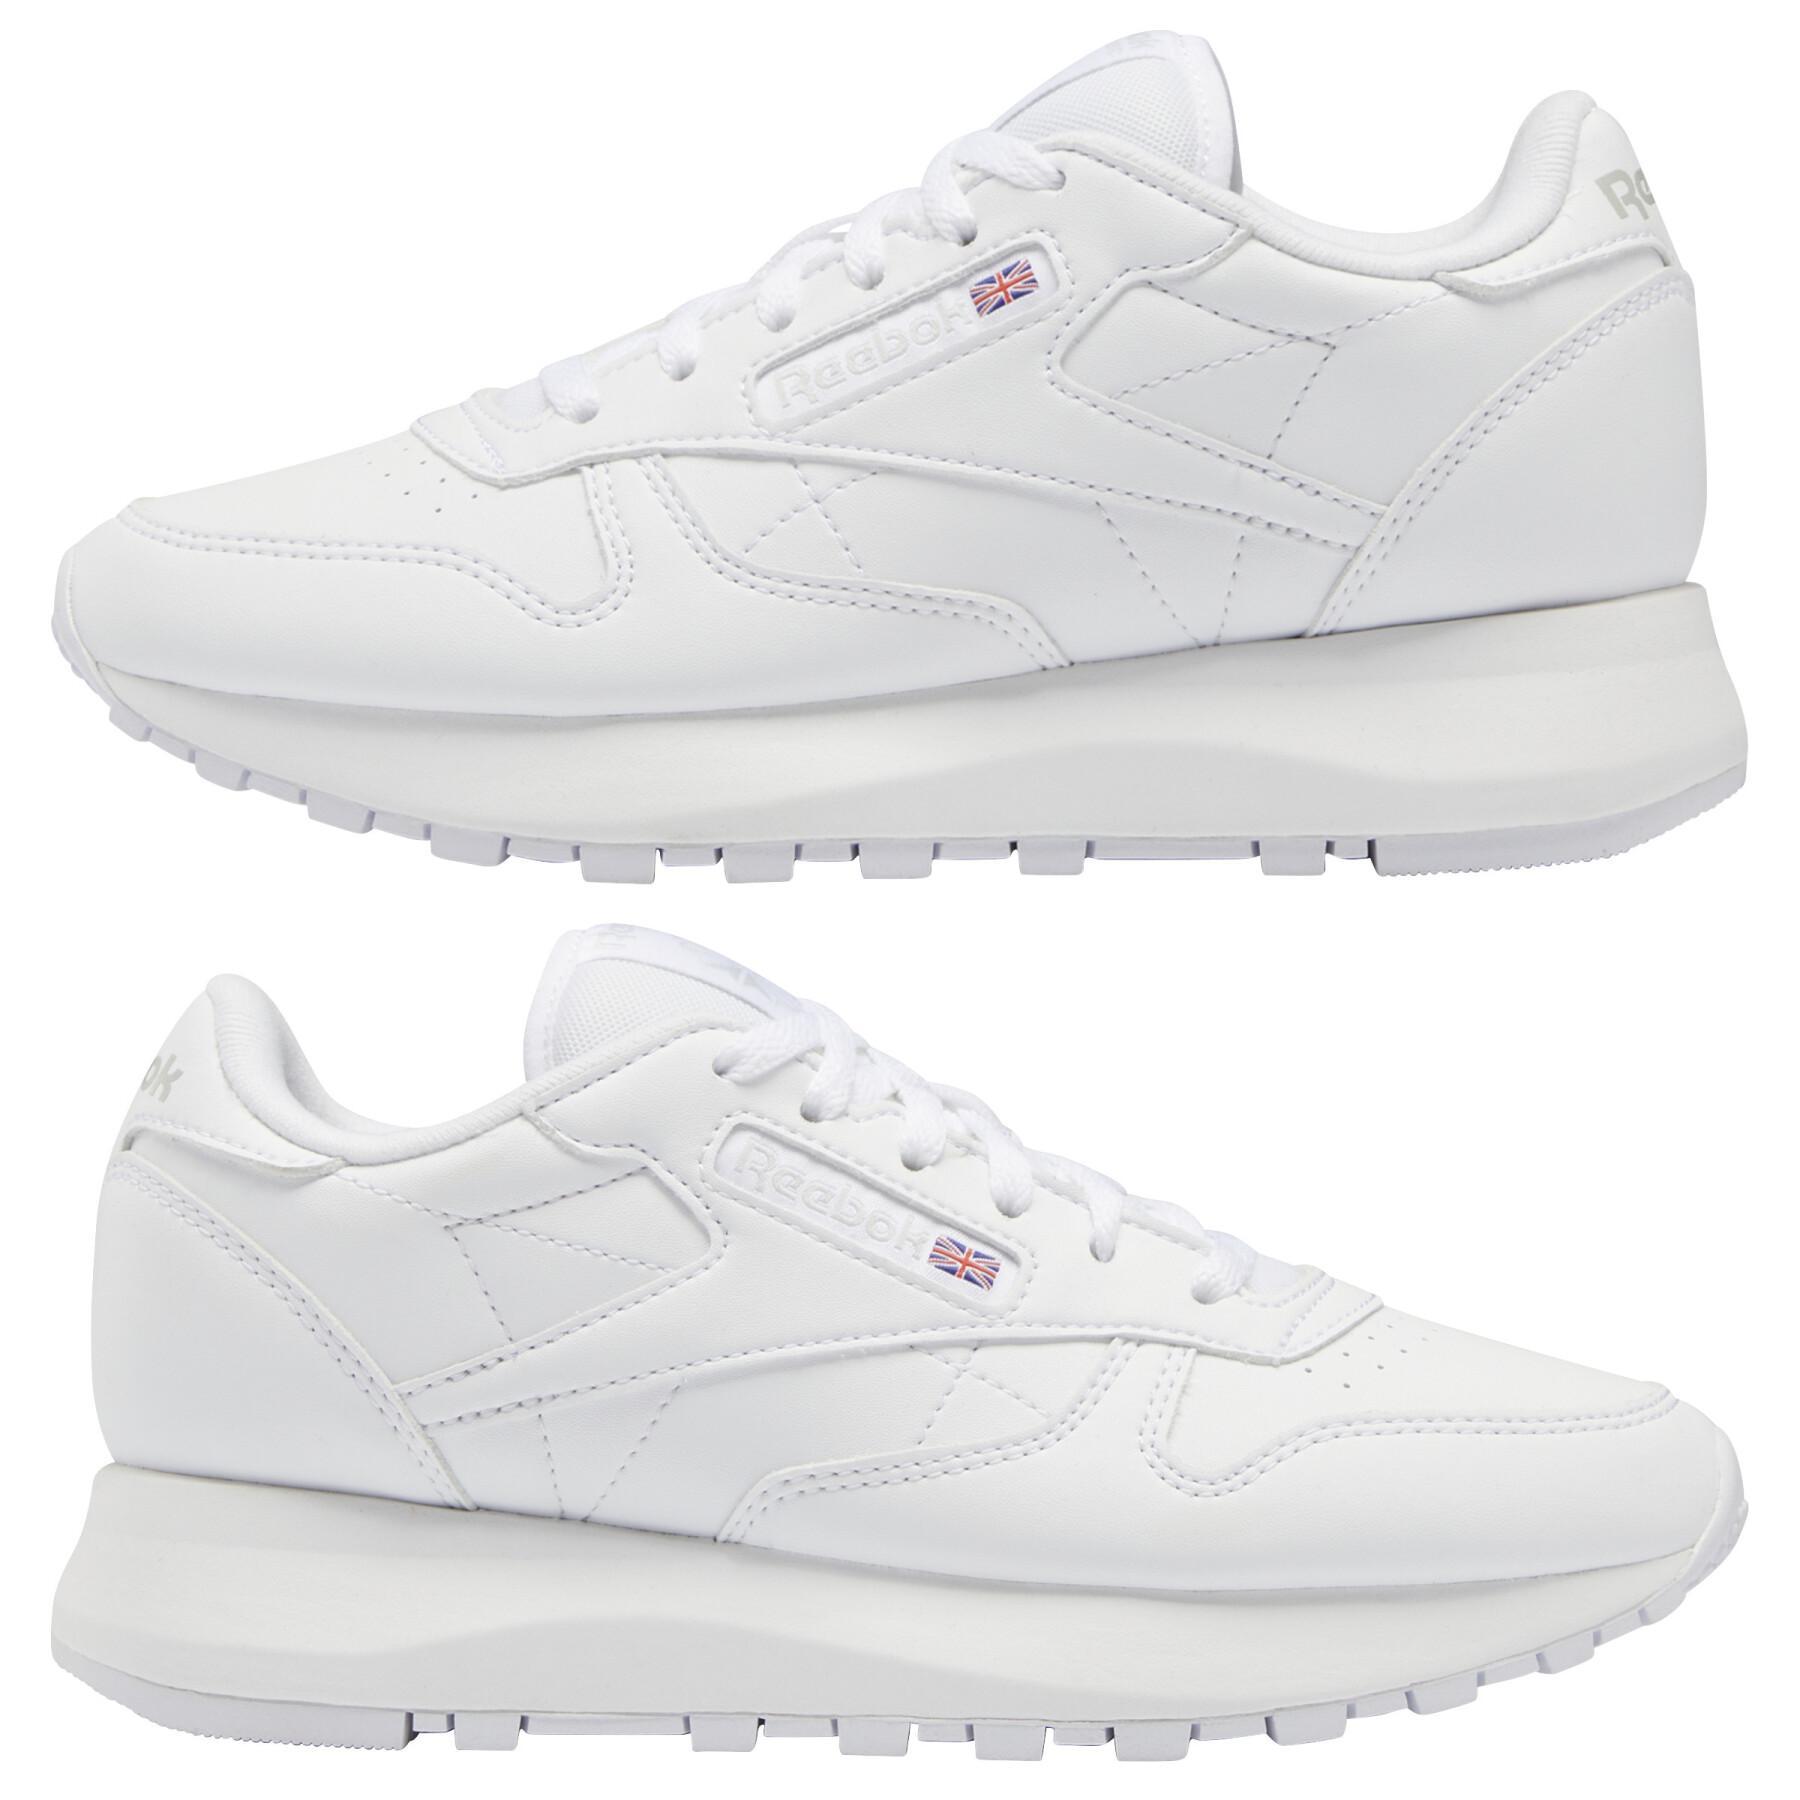 Children's sneakers Reebok Classic Leather SP